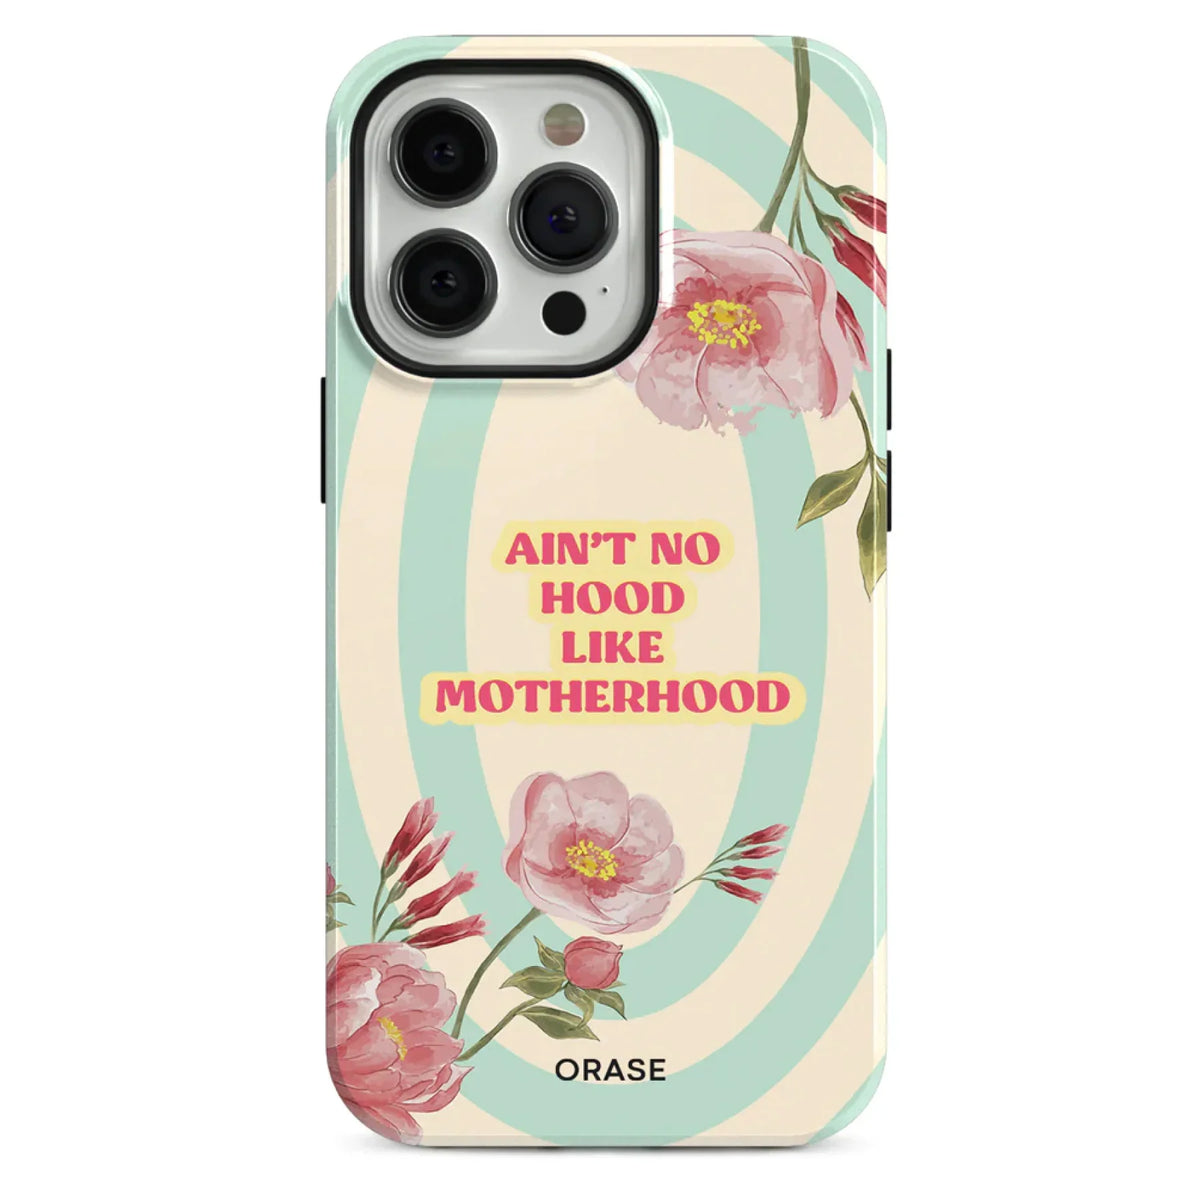 Ain't No Hood iPhone Case - iPhone 11 Pro